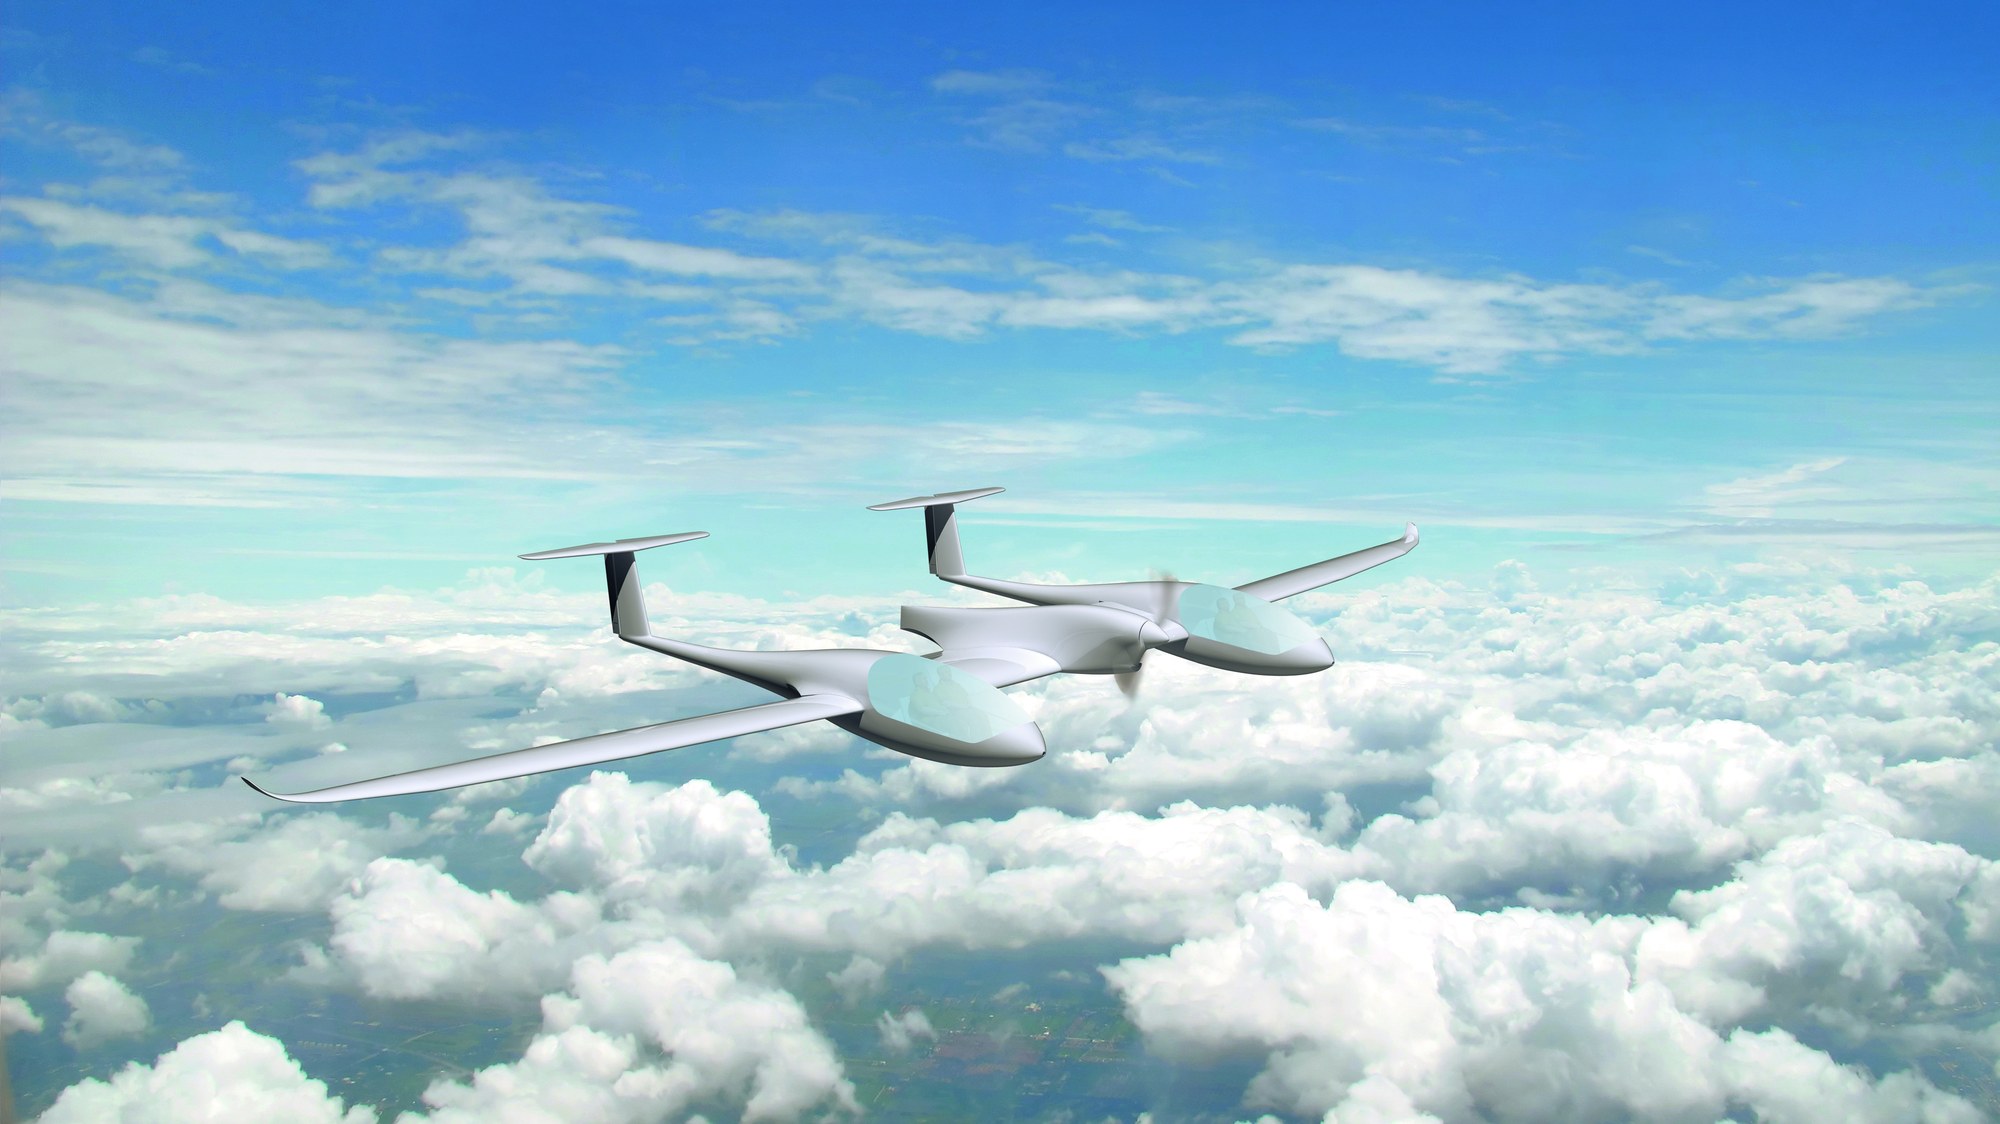 The Hy4 makes cleaner, quieter, more energy-efficient and safer flight possible